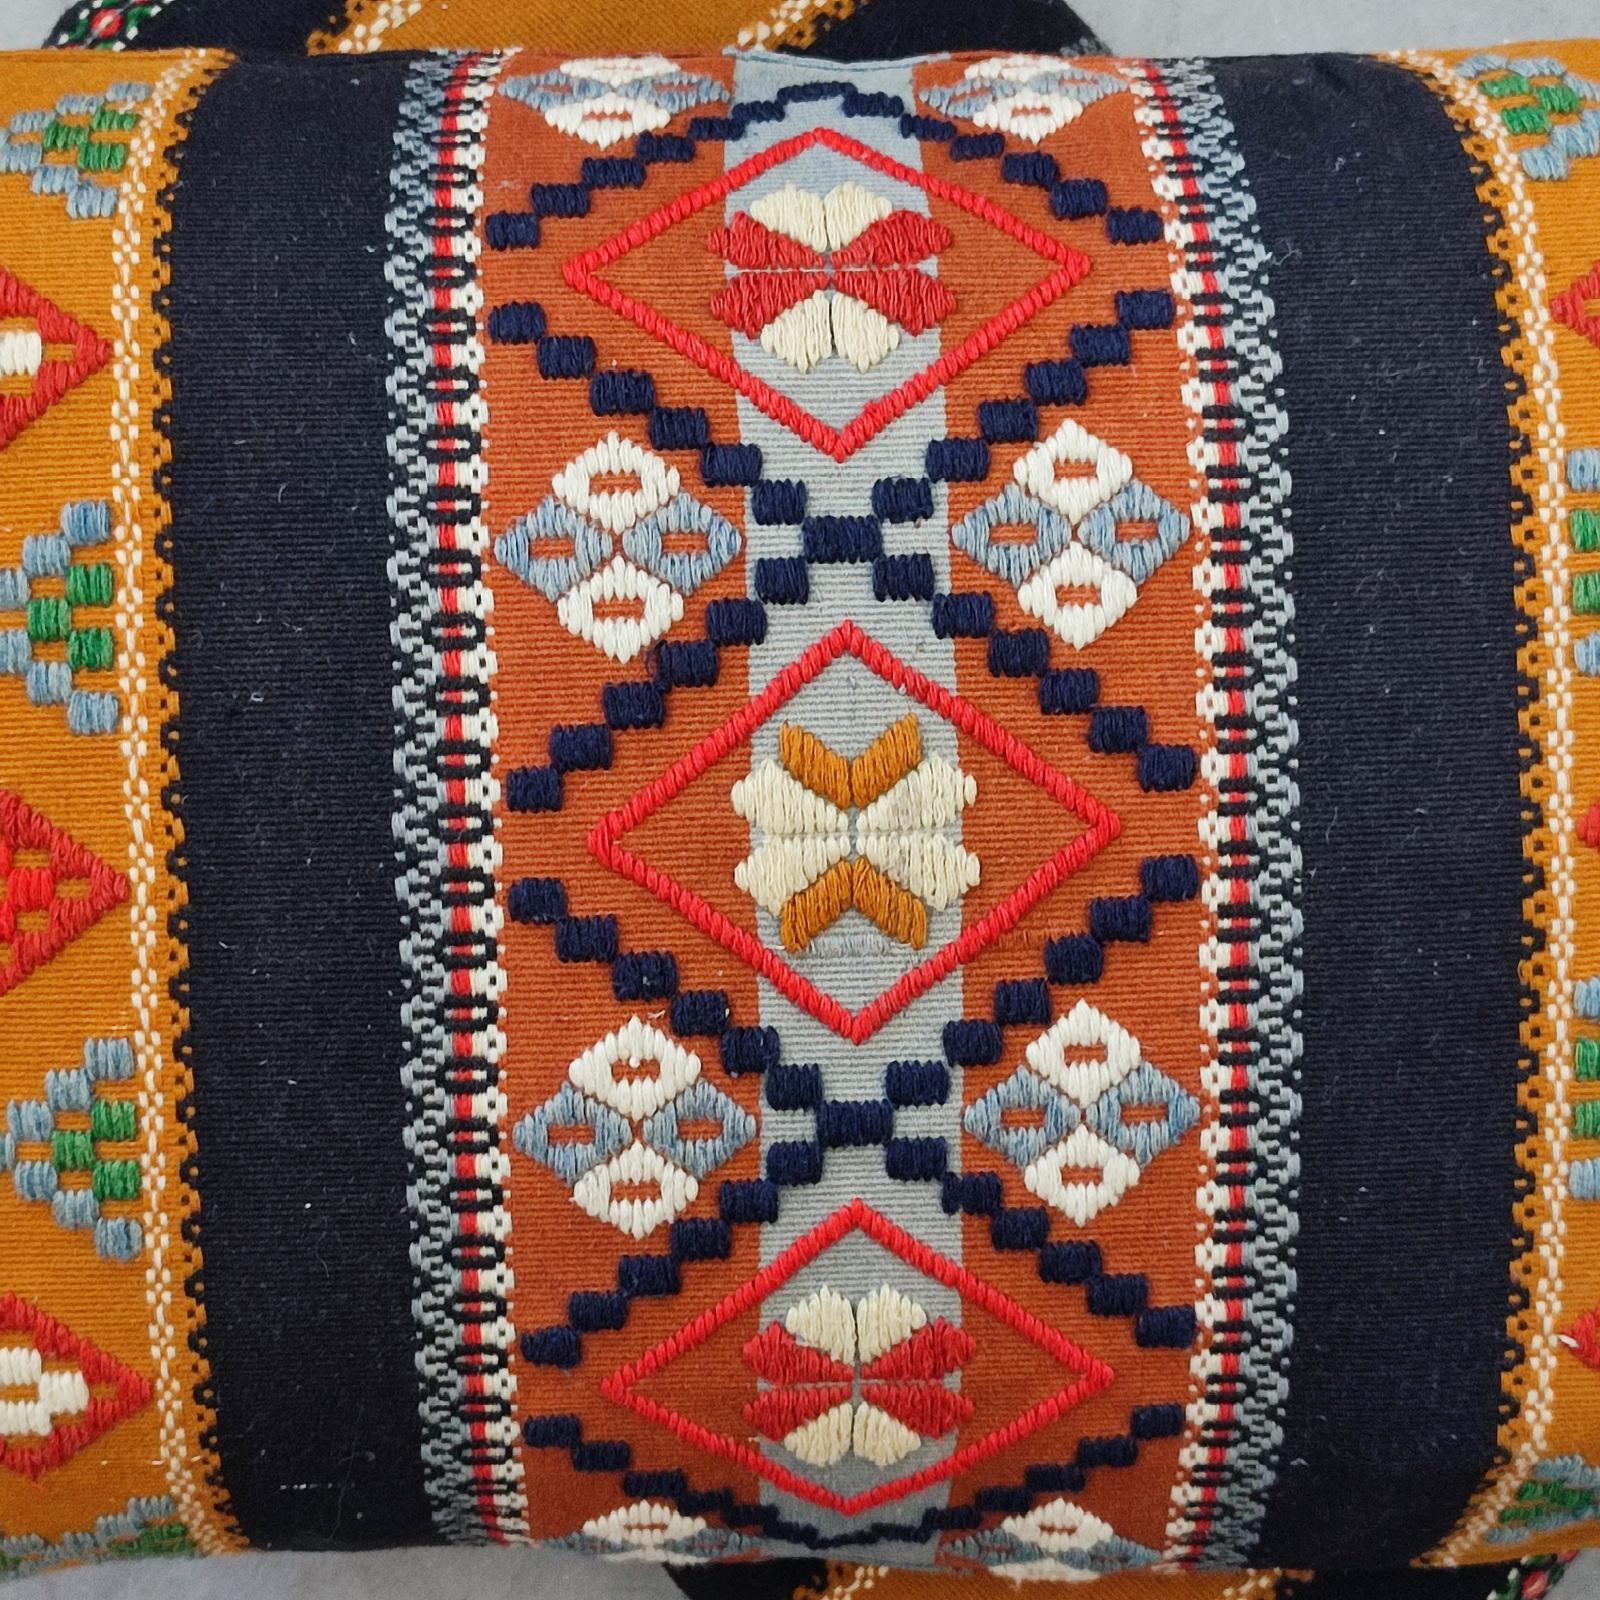 Flatweave Pair of Large Pillows, Sweden, Early 20th Century For Sale 1